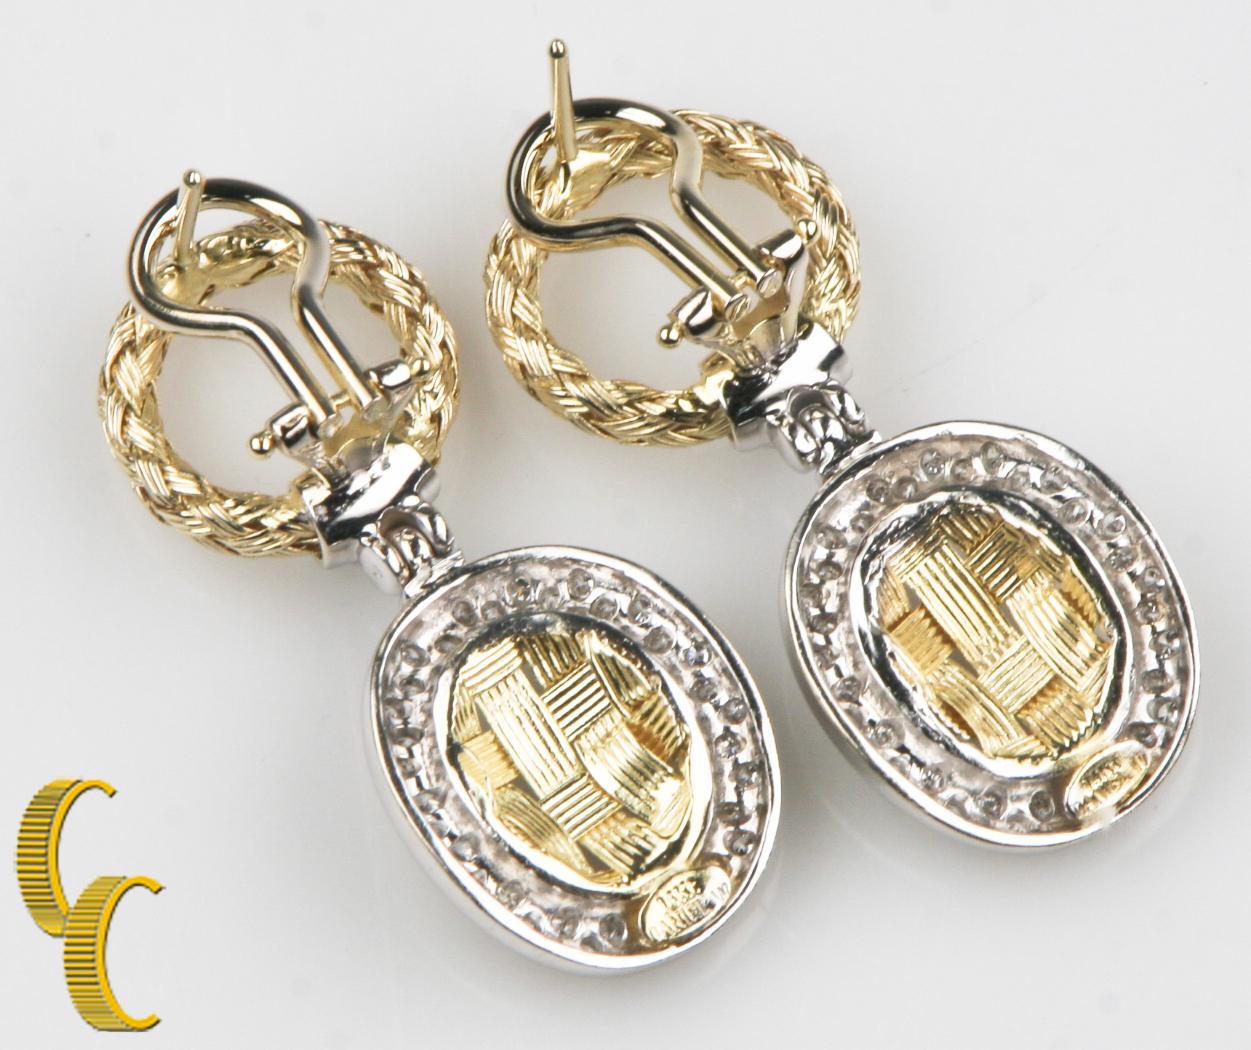 Gorgeous 14k White and Yellow Gold Earrings
Feature Delicate Basket Weave Design Set w/ White Gold Round Diamond Bezel
Hang from Woven Wreath Gold Hoop
Total Length of Drop = 38 mm
Width of Plaque = 16 mm
Diameter of Hoop = 15 mm
Total Mass = 12.8